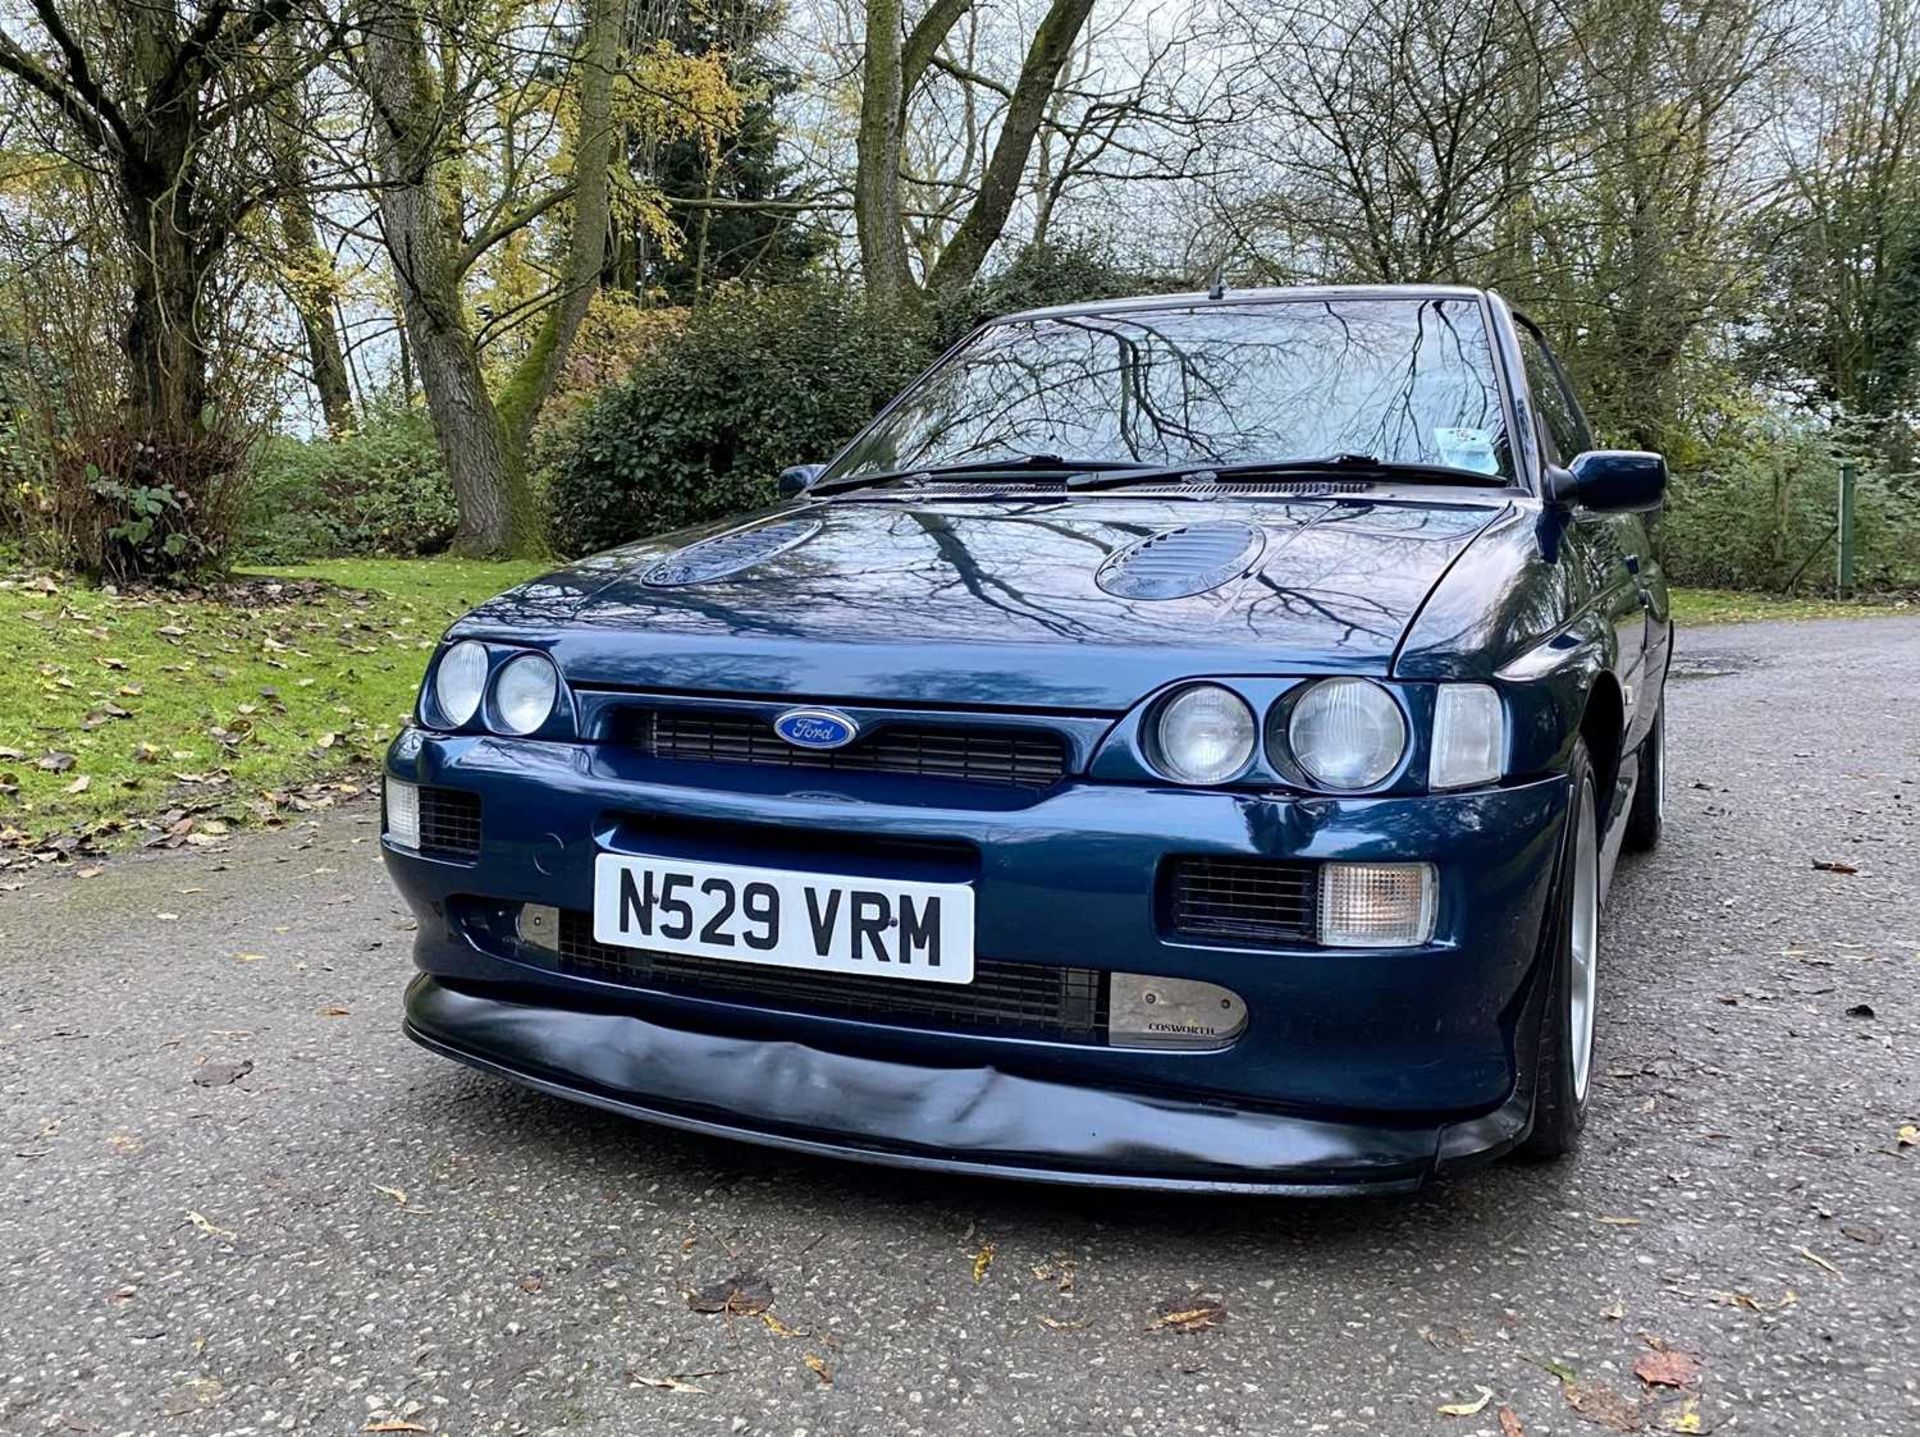 1995 Ford Escort RS Cosworth LUX Only 56,000 miles, finished in rare Petrol Blue - Image 6 of 98